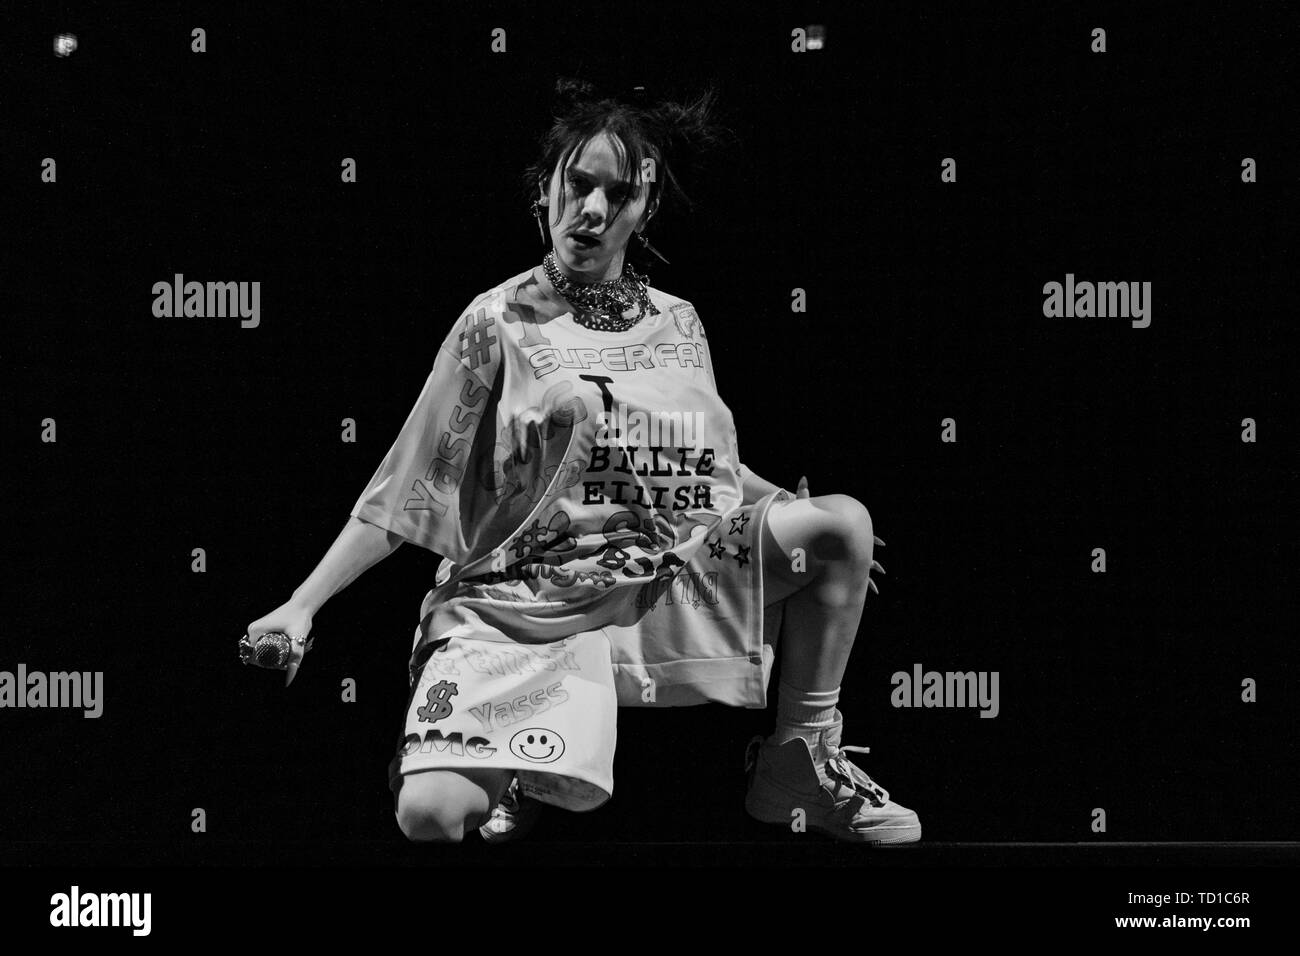 June 9, 2019 - Chicago, Illinois, U.S - BILLIE EILISH during the When We All Fall Asleep Tour at United Center in Chicago, Illinois (Credit Image: © Daniel DeSlover/ZUMA Wire) Stock Photo